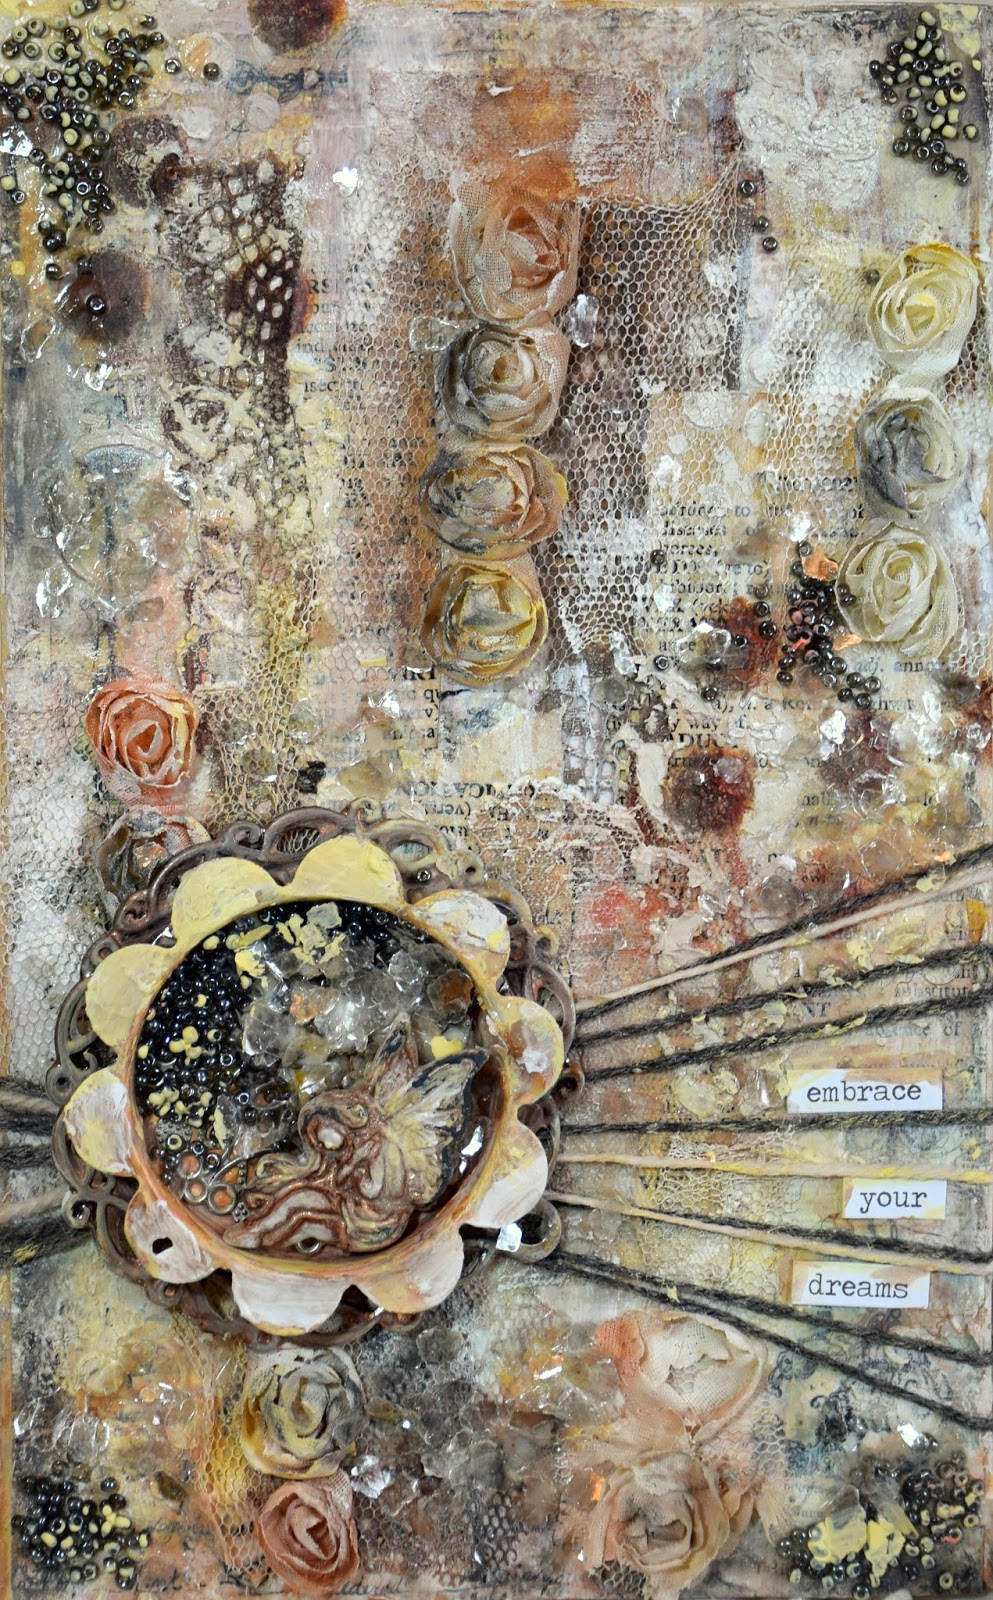 TandiArt: ' Embrace your Dream' mixed media on wood for Cozy Challenge ...